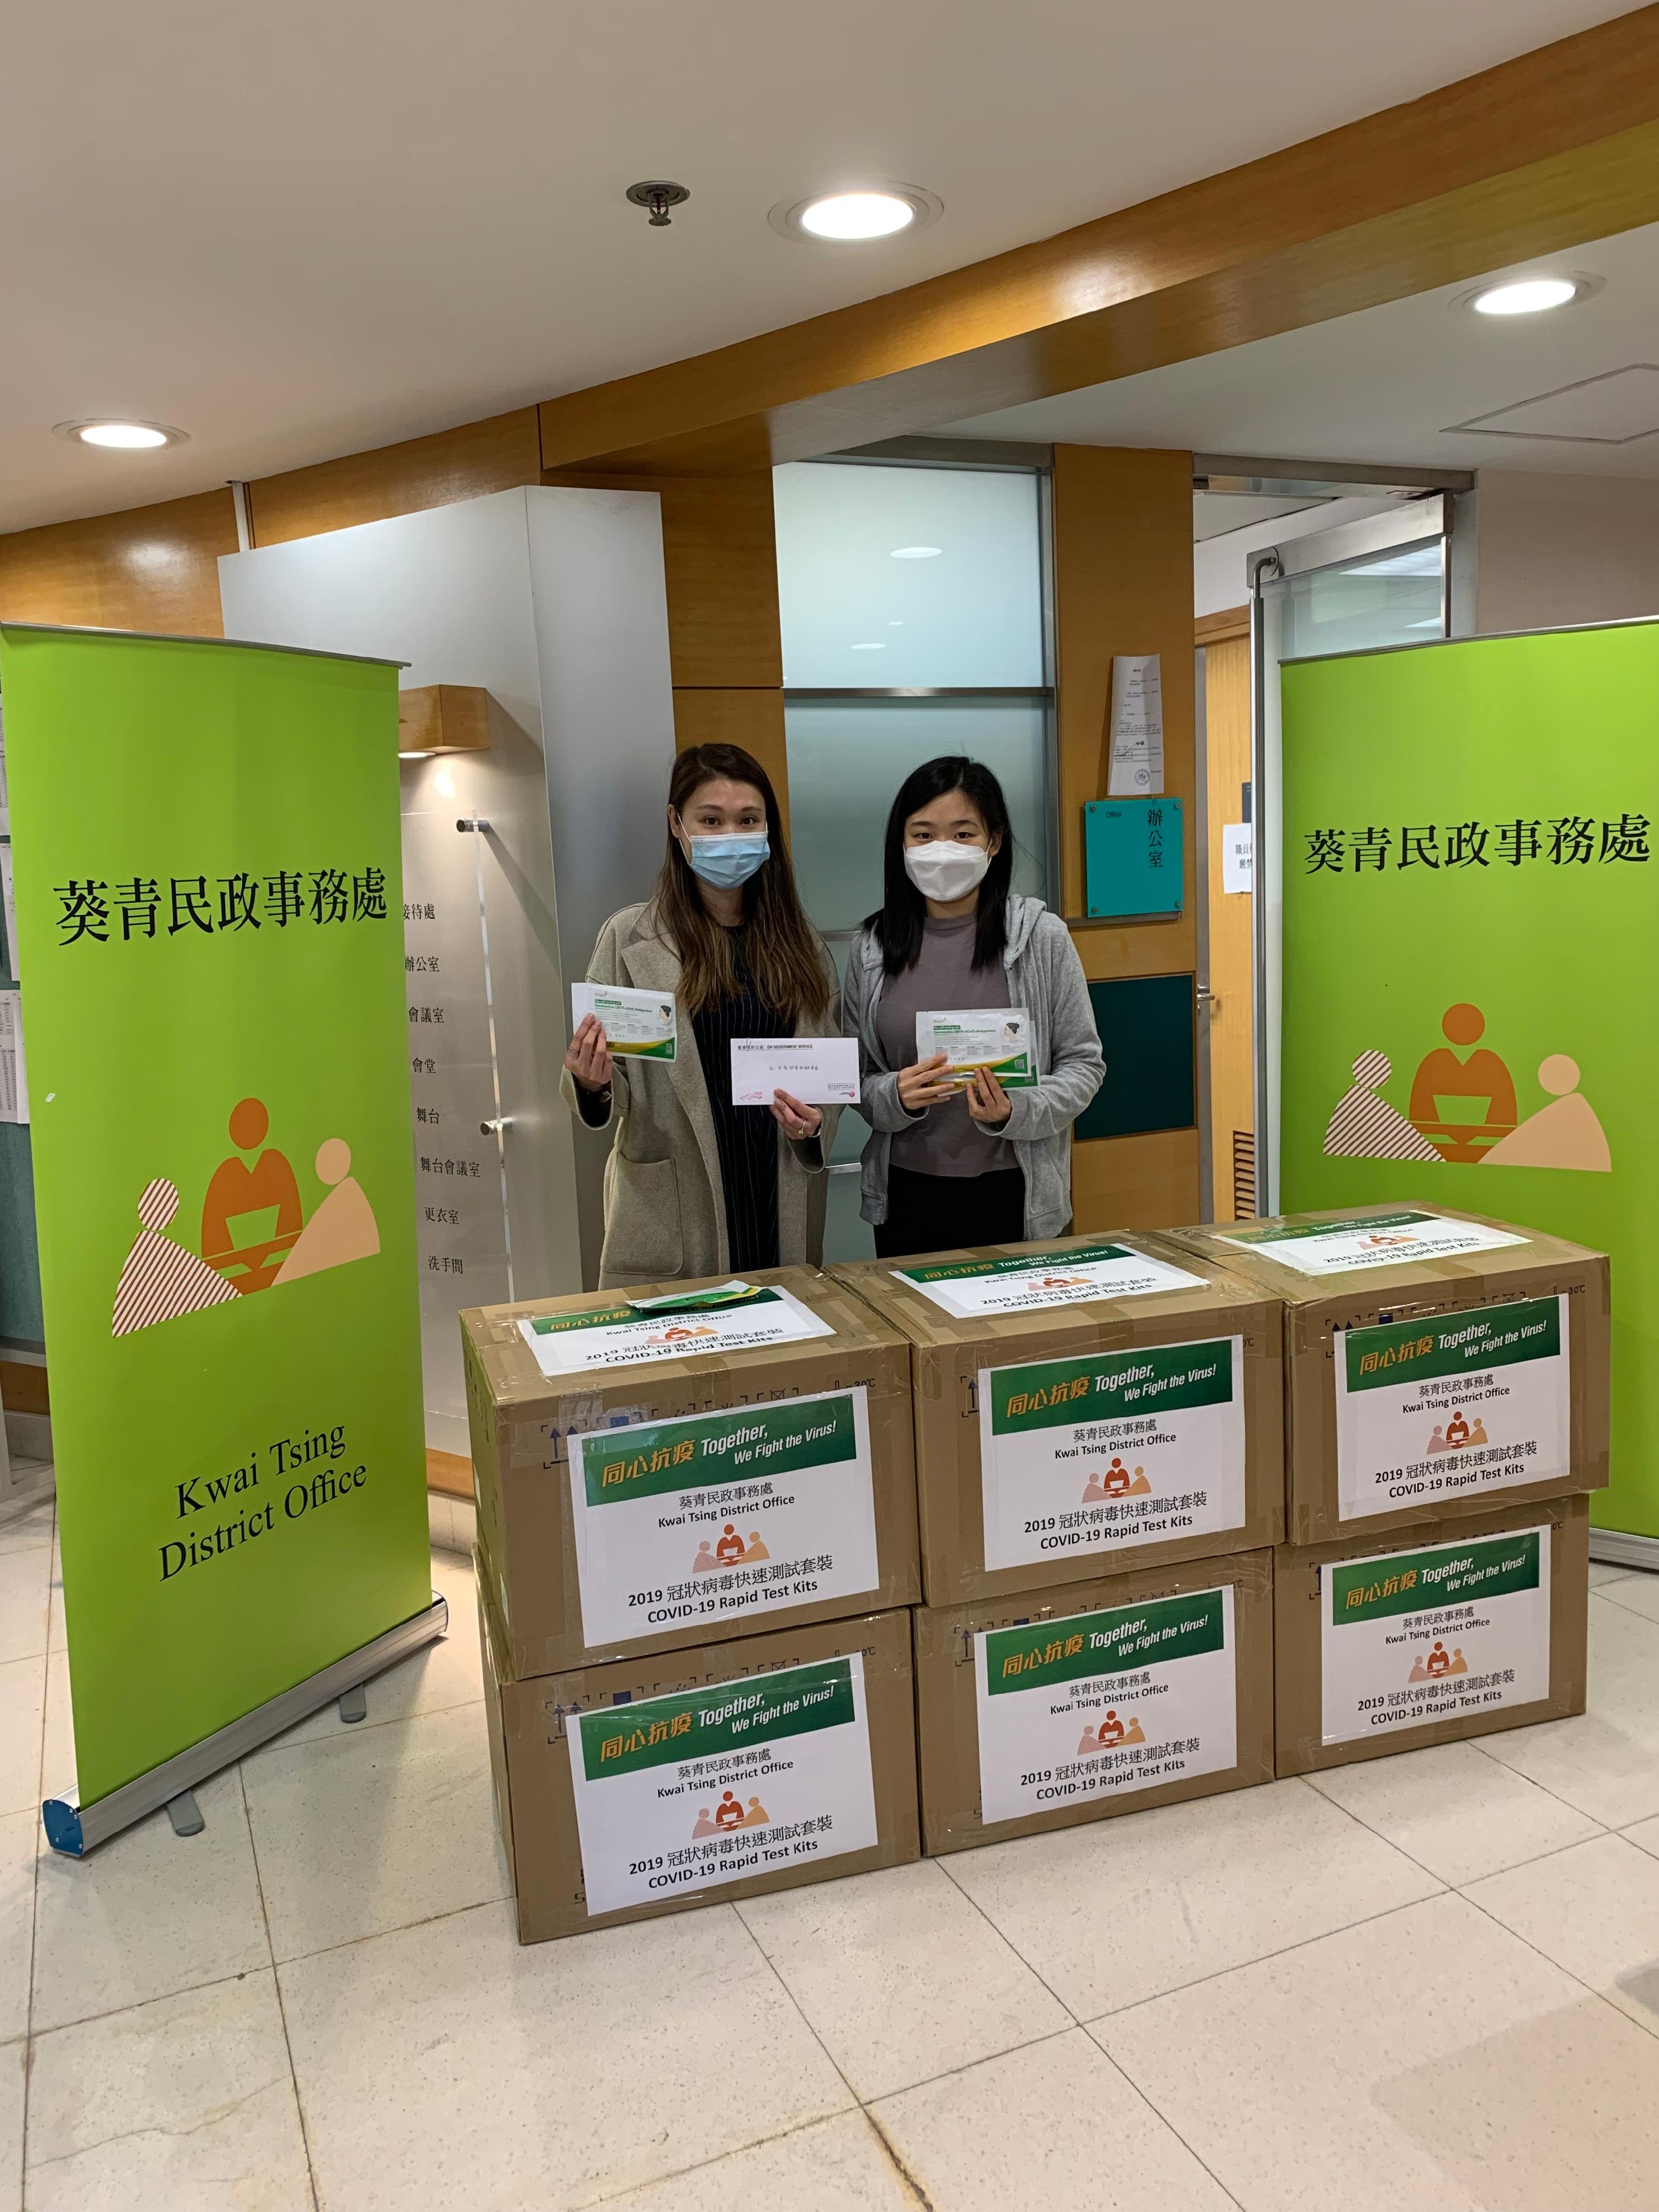 The Kwai Tsing District Office today (April 19) distributed COVID-19 rapid test kits to households, cleansing workers and property management staff living and working in On Yam Estate for voluntary testing through the Housing Department and the property management company.